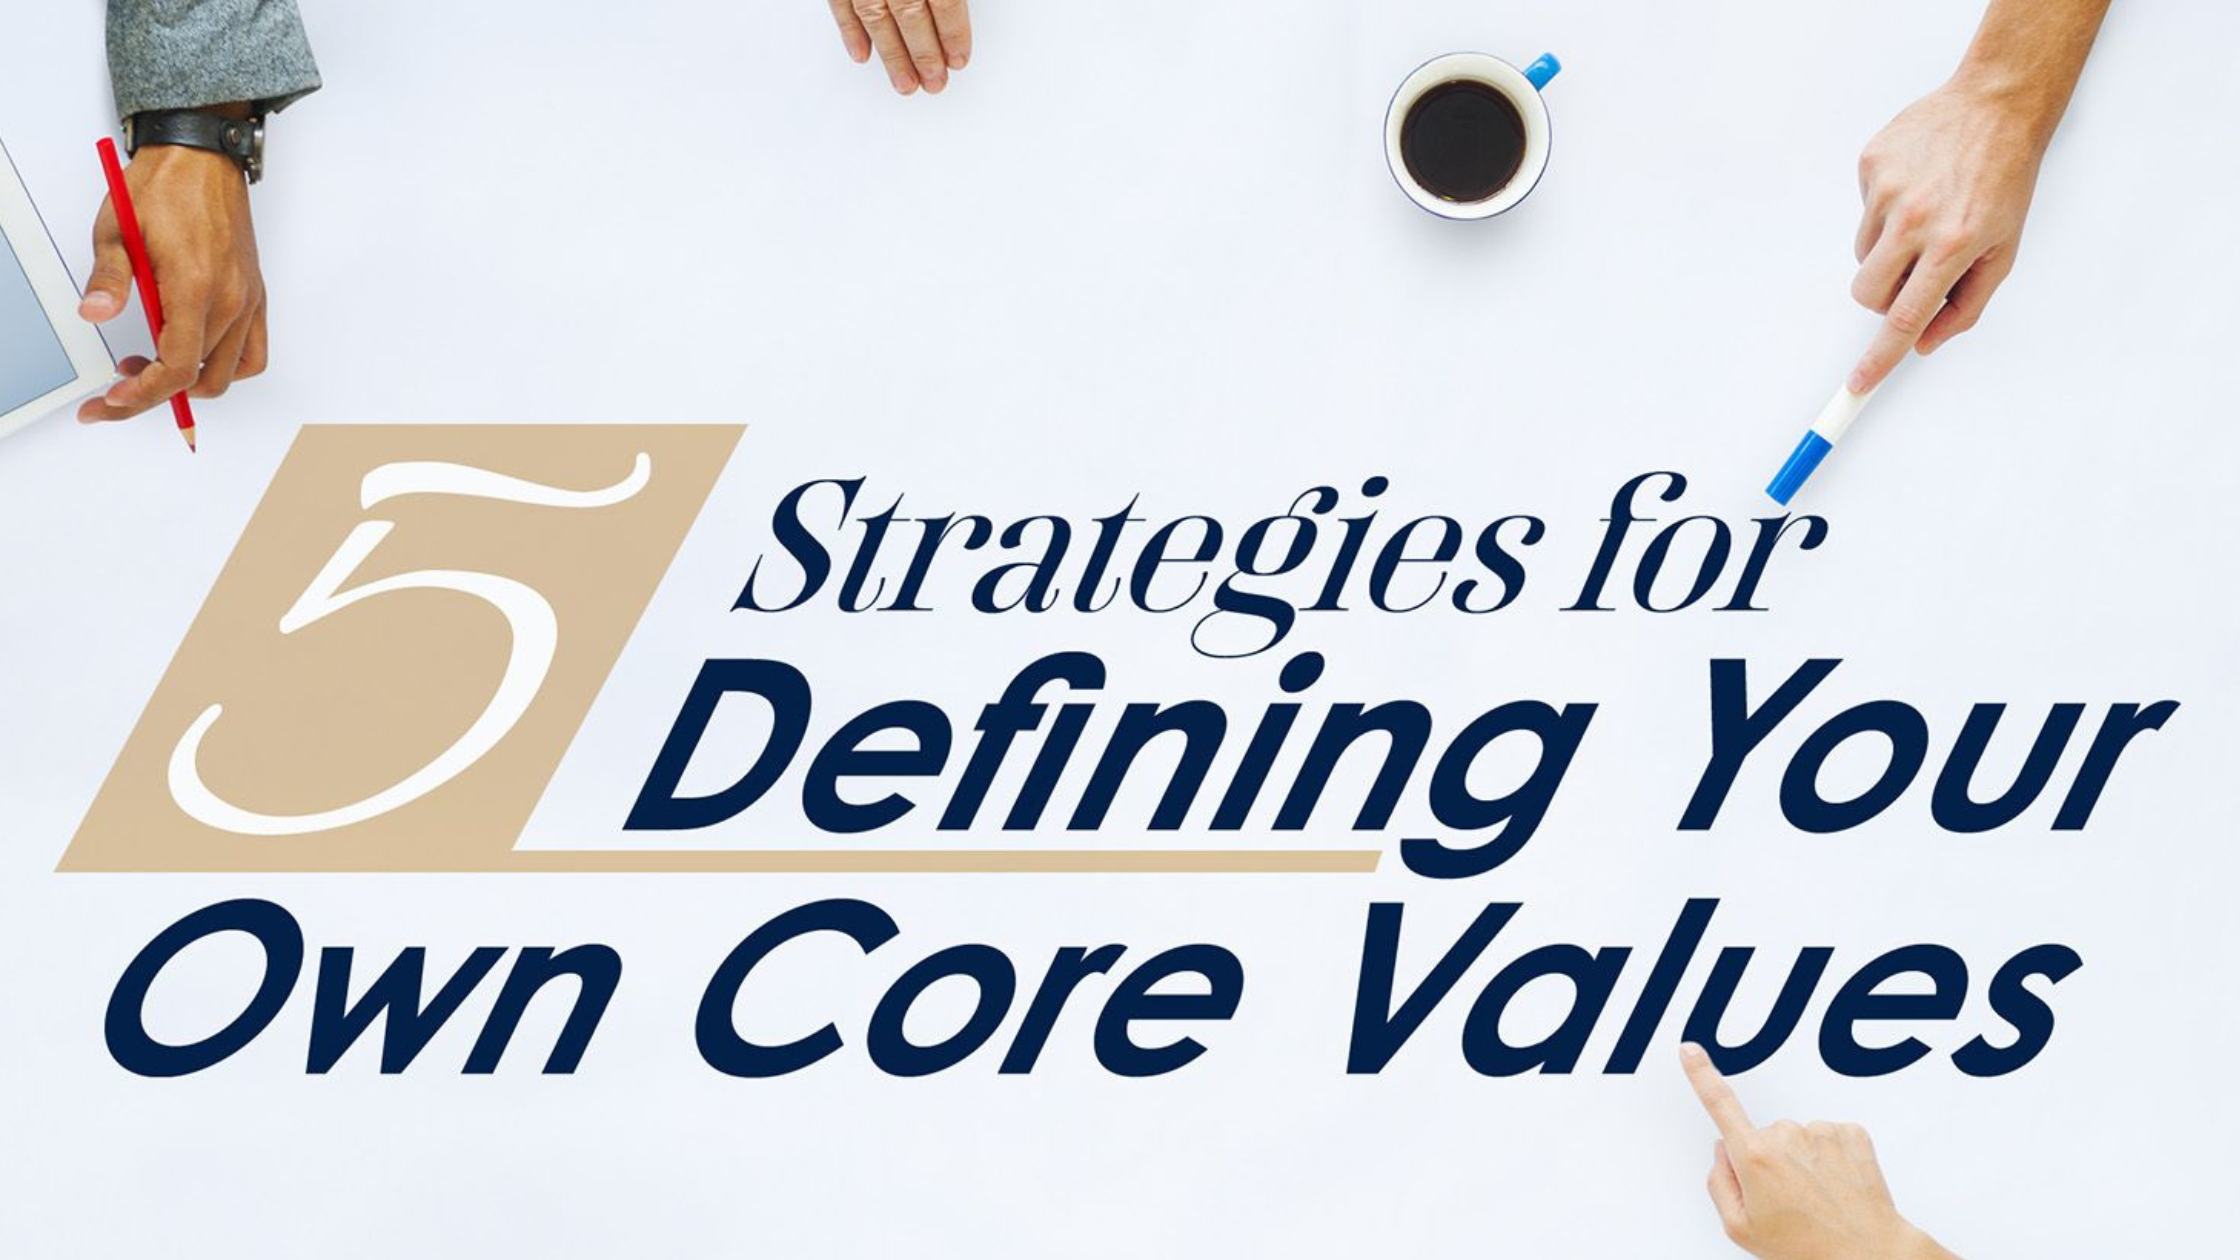 5 Strategies for Defining Your Own Core Values